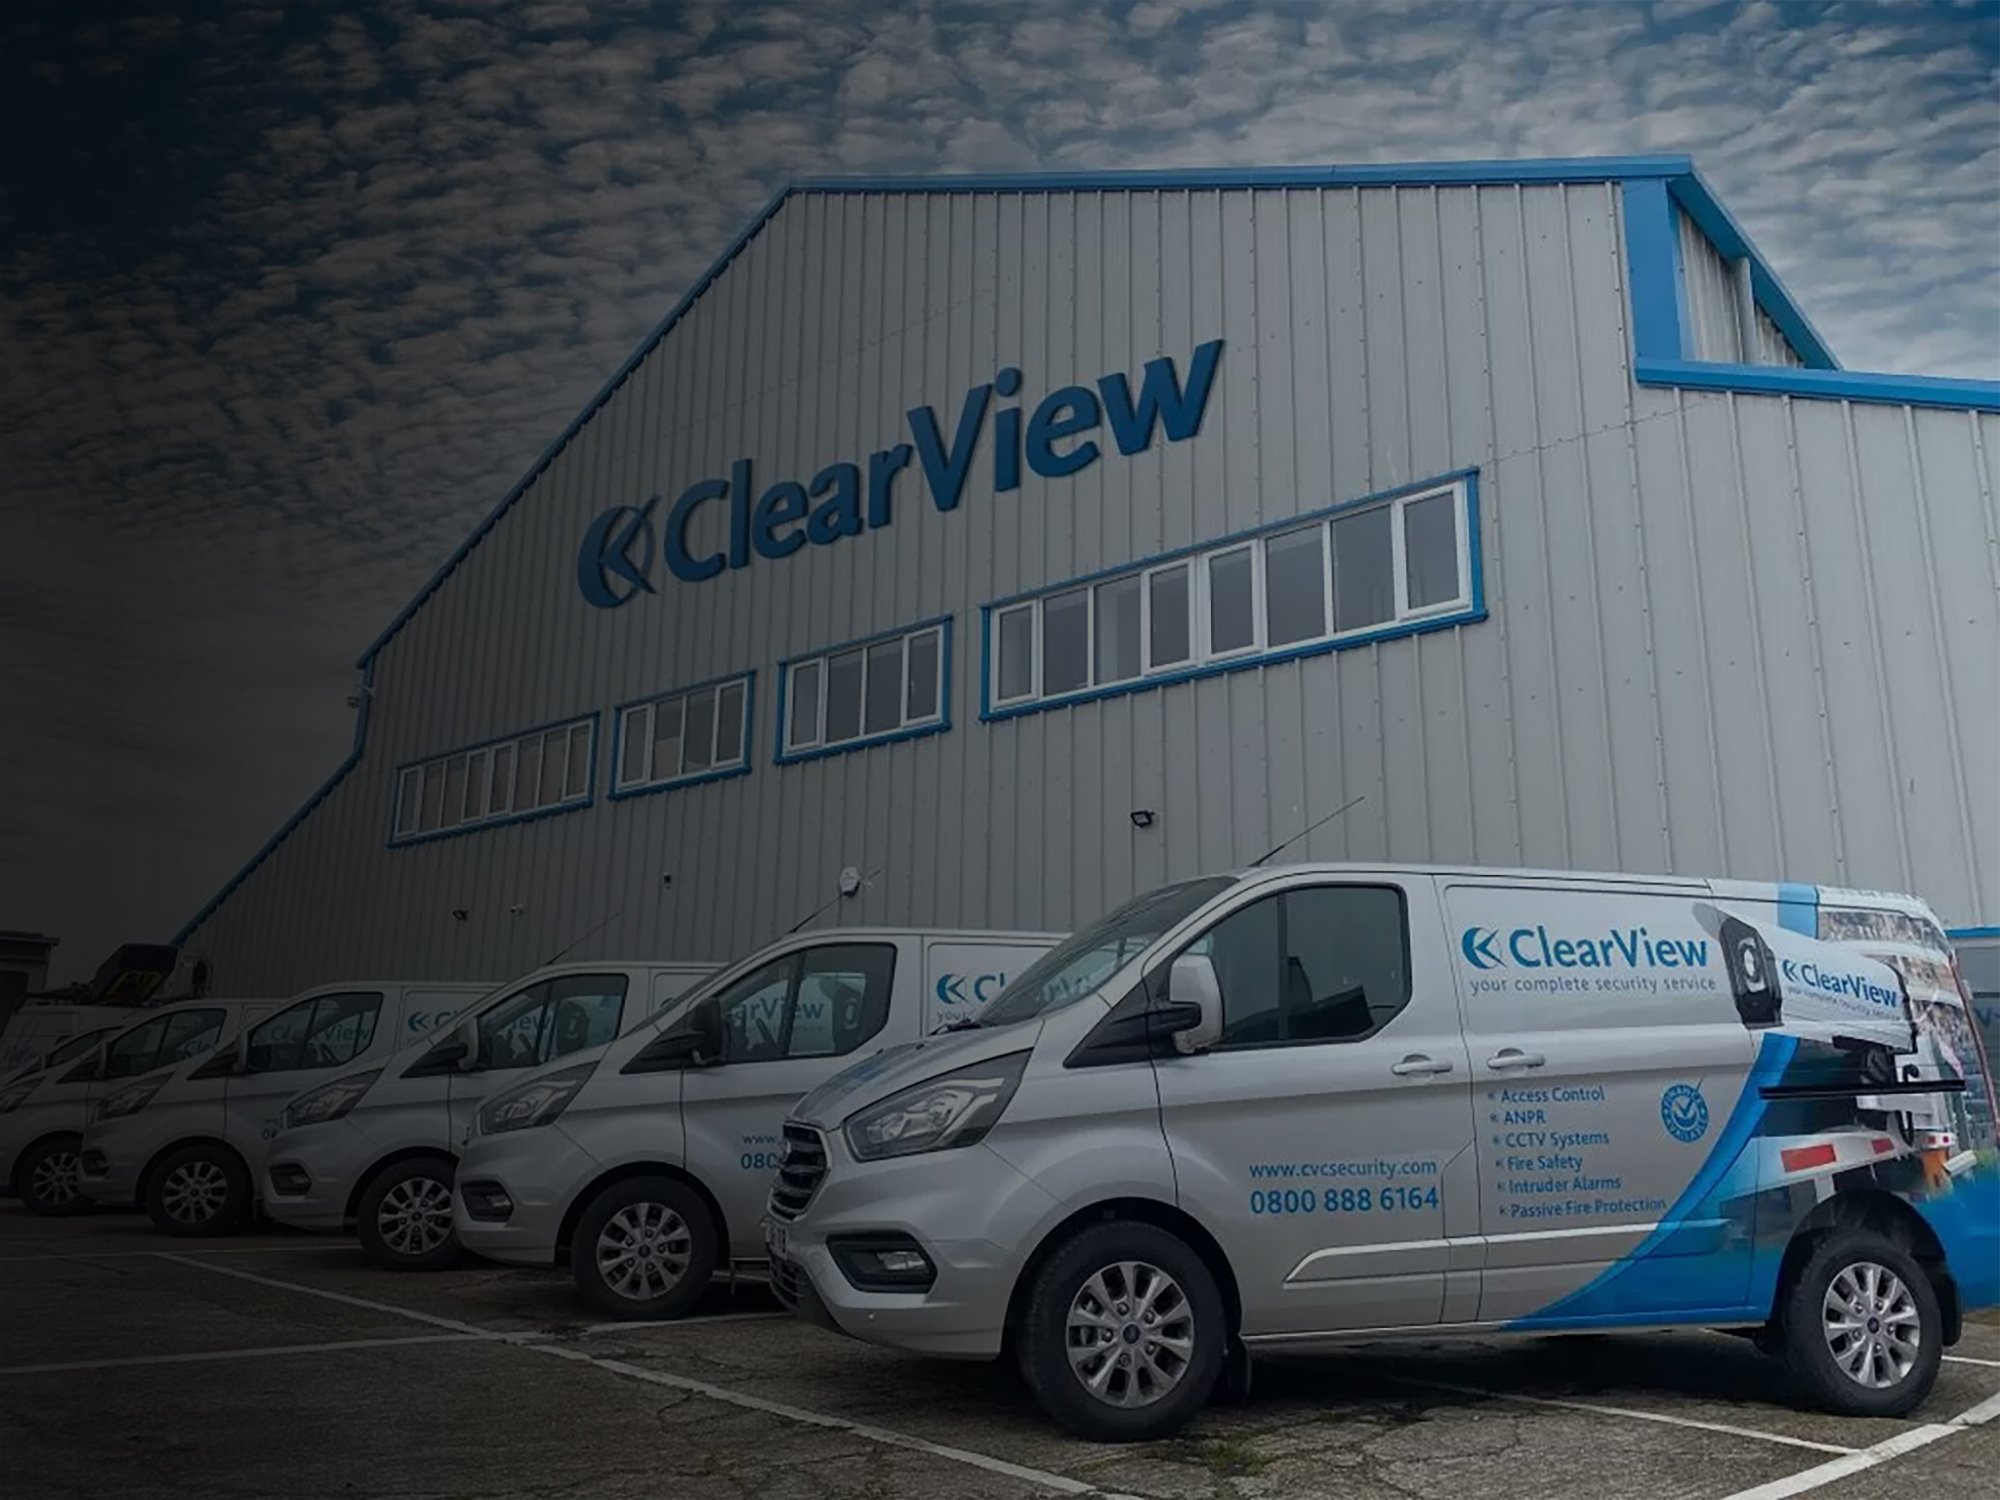 cctv installation team vans outside ClearView Communications